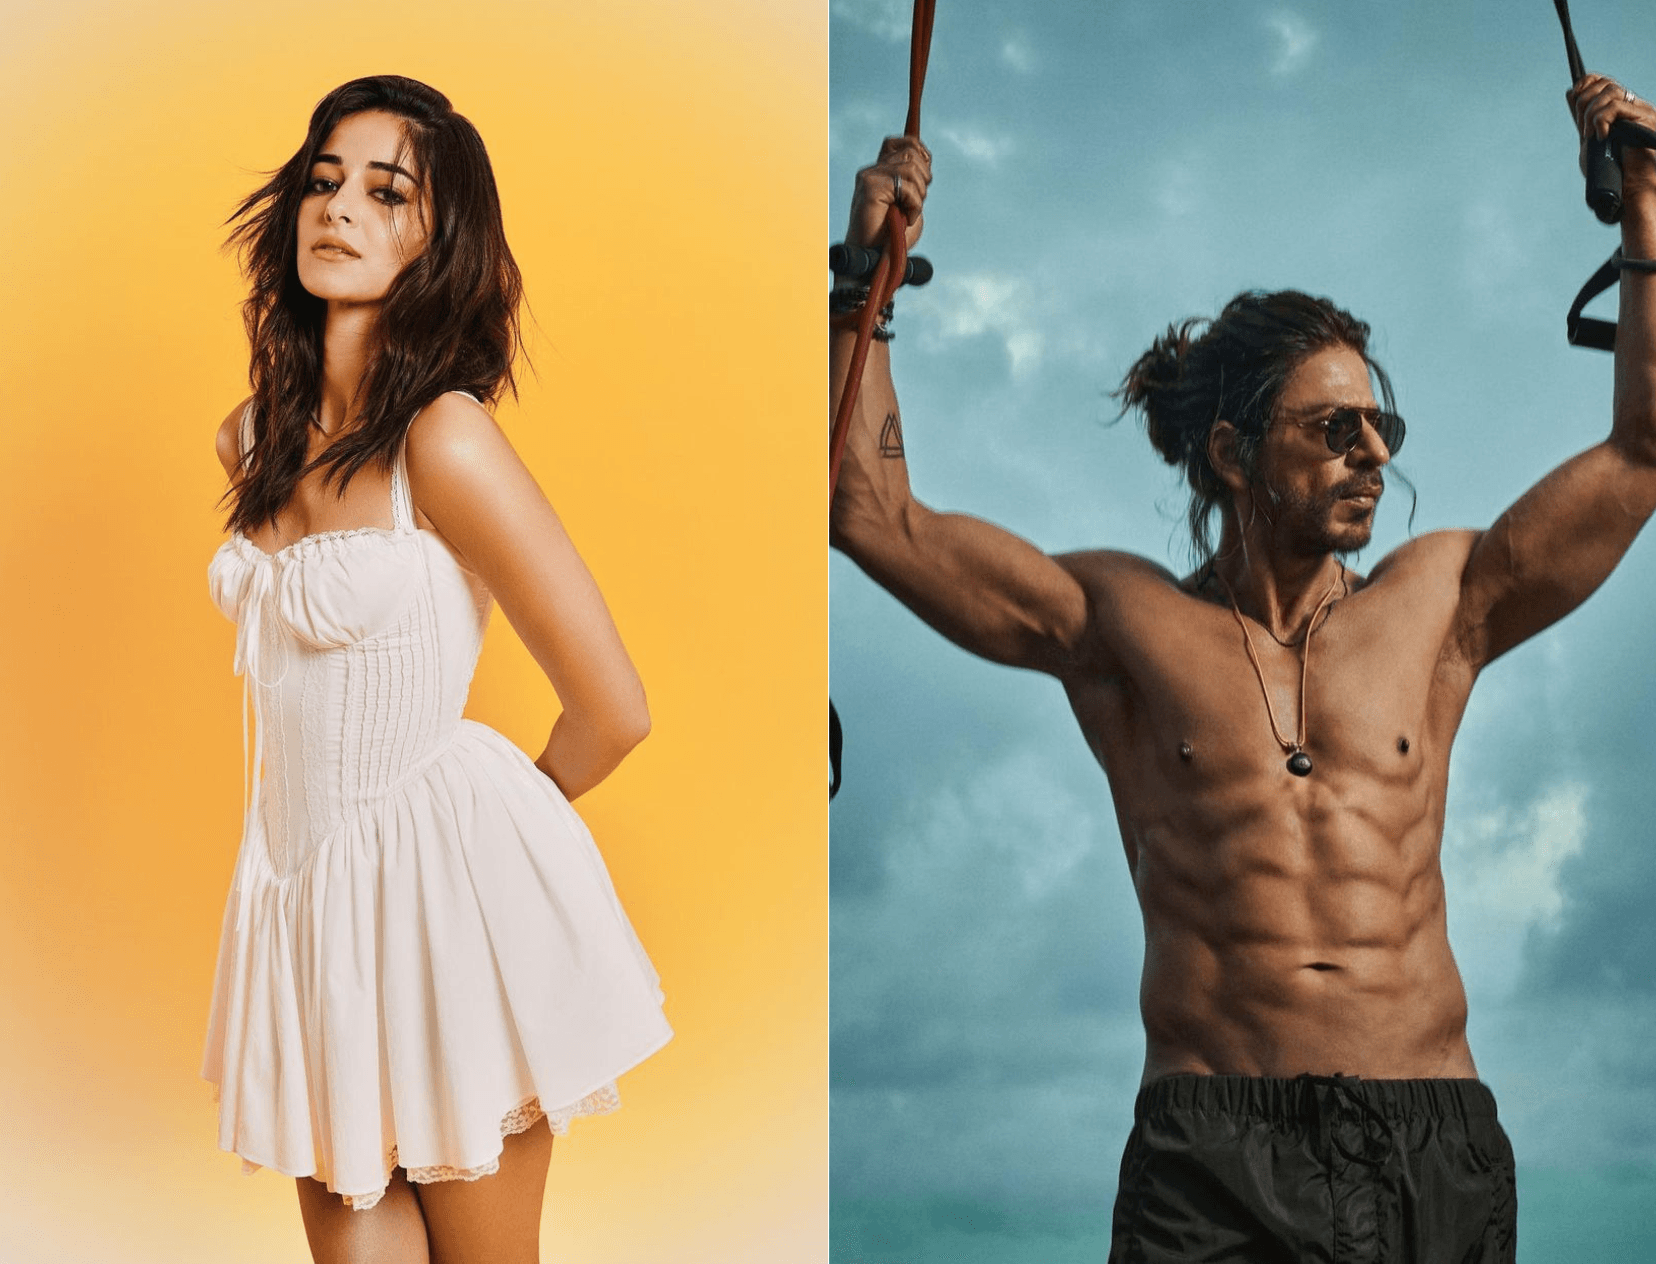 Shah Rukh Khan Once Sent A Note To Ananya Panday &amp; This Is What She Did